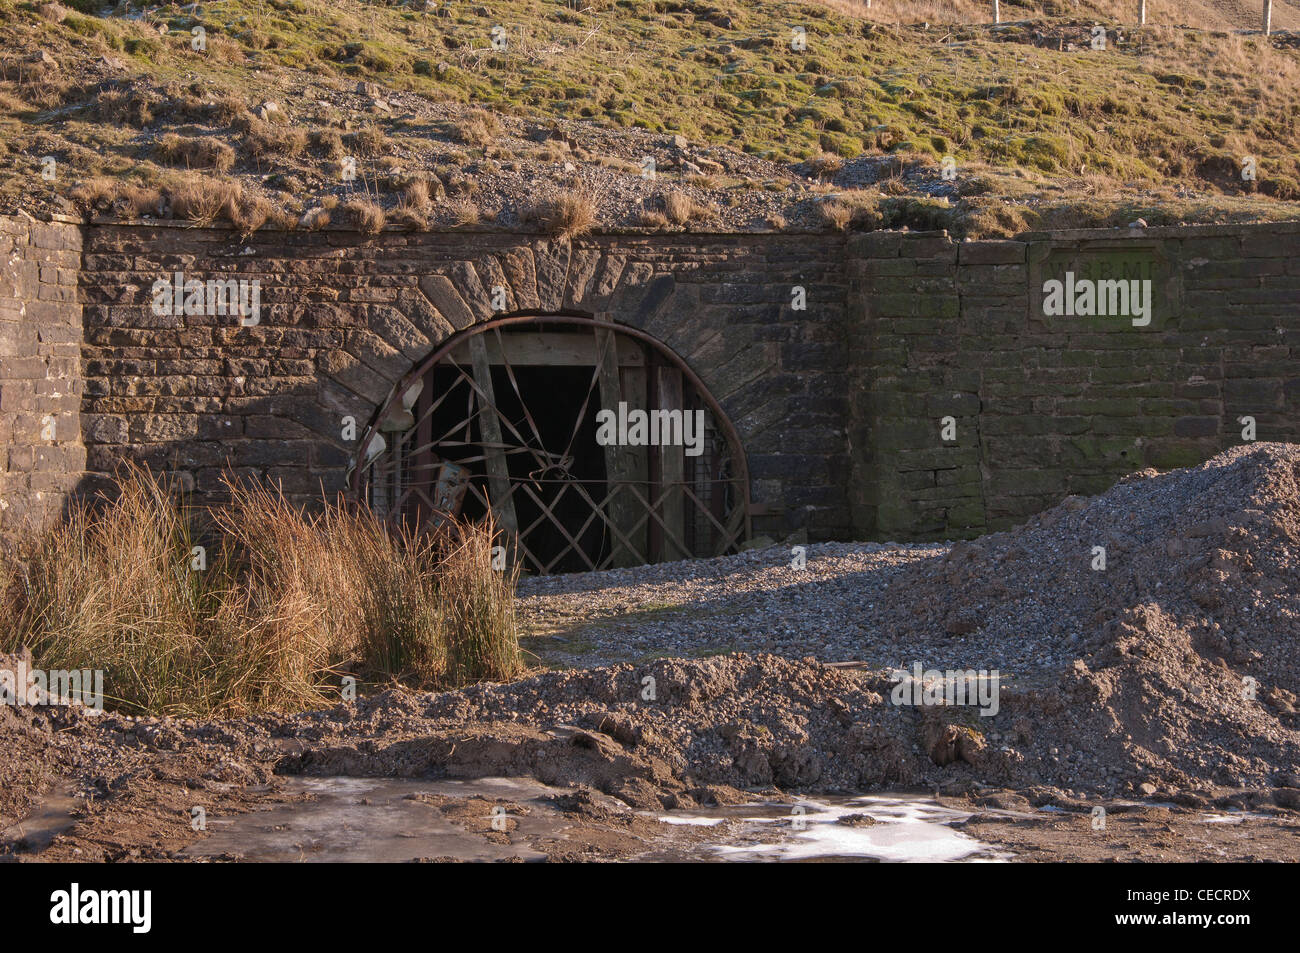 The Groverake mine is located between the villages of Rookhope in Weardale in County Durham and Allenheads in Northumberland. A Closed mine entrance. Stock Photo